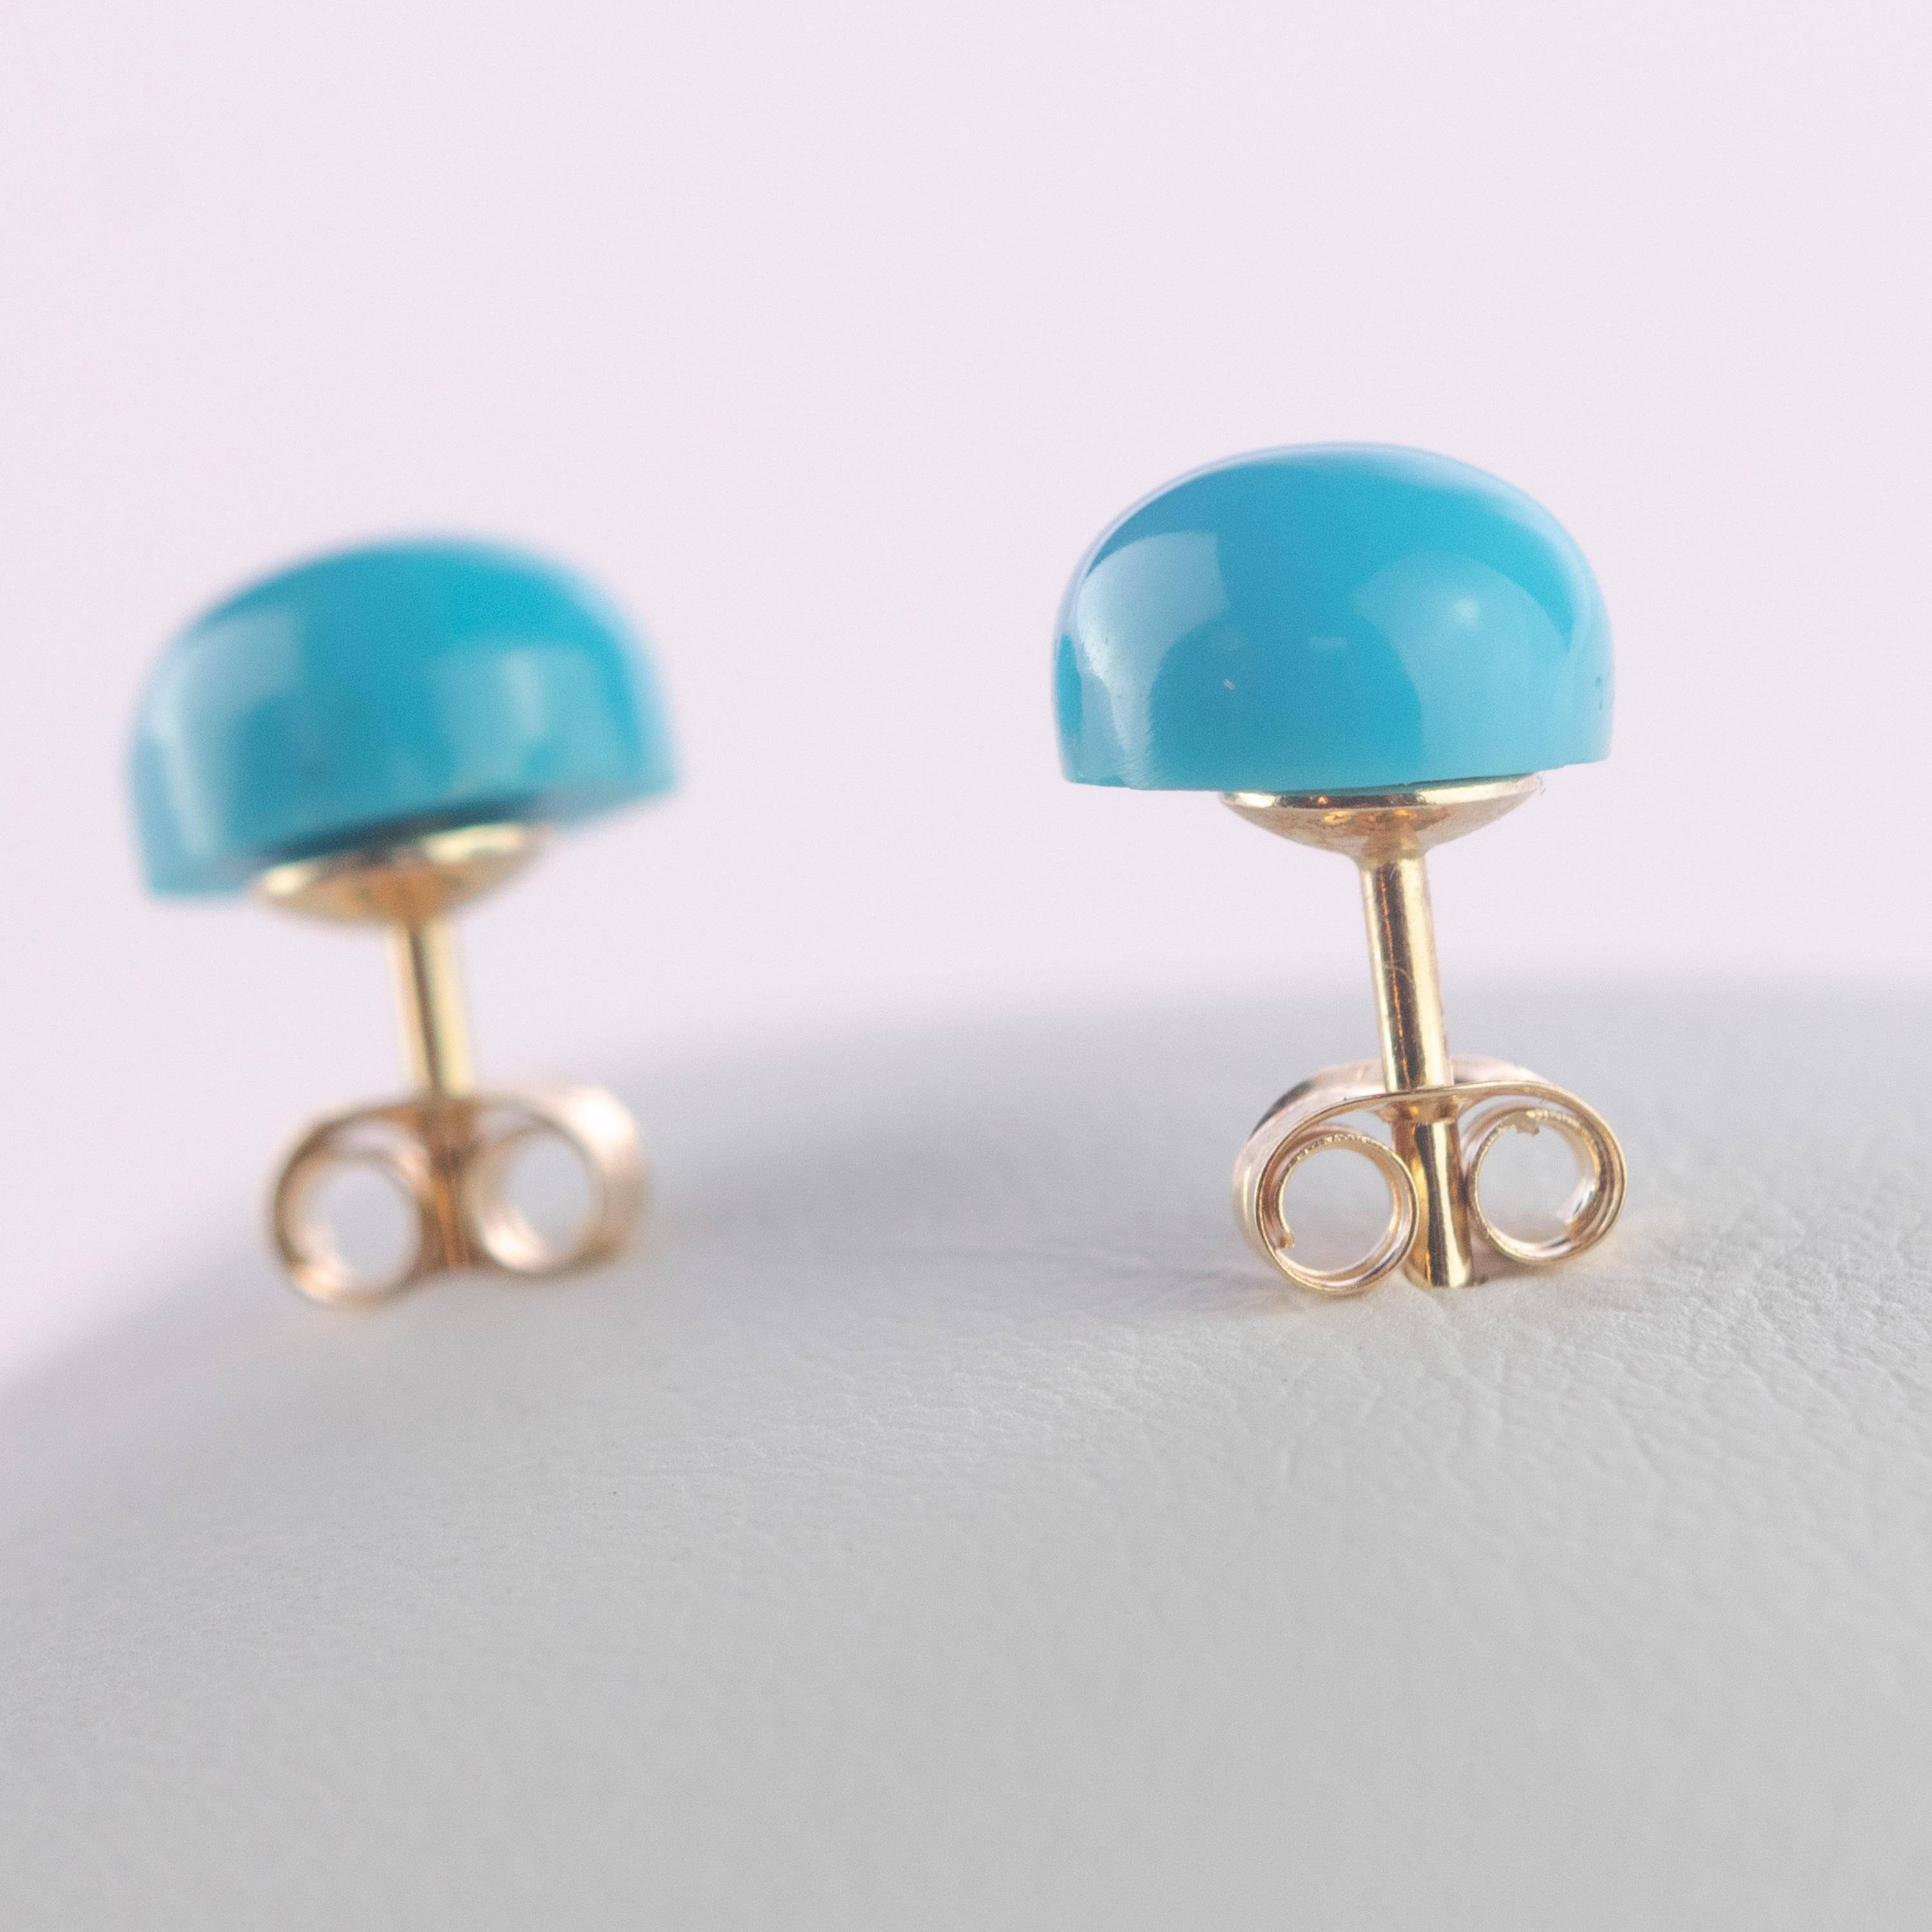 Natural Turquoise Round Cabochon 14 Karat Gold Stud Chic Cocktail Earrings For Sale 1